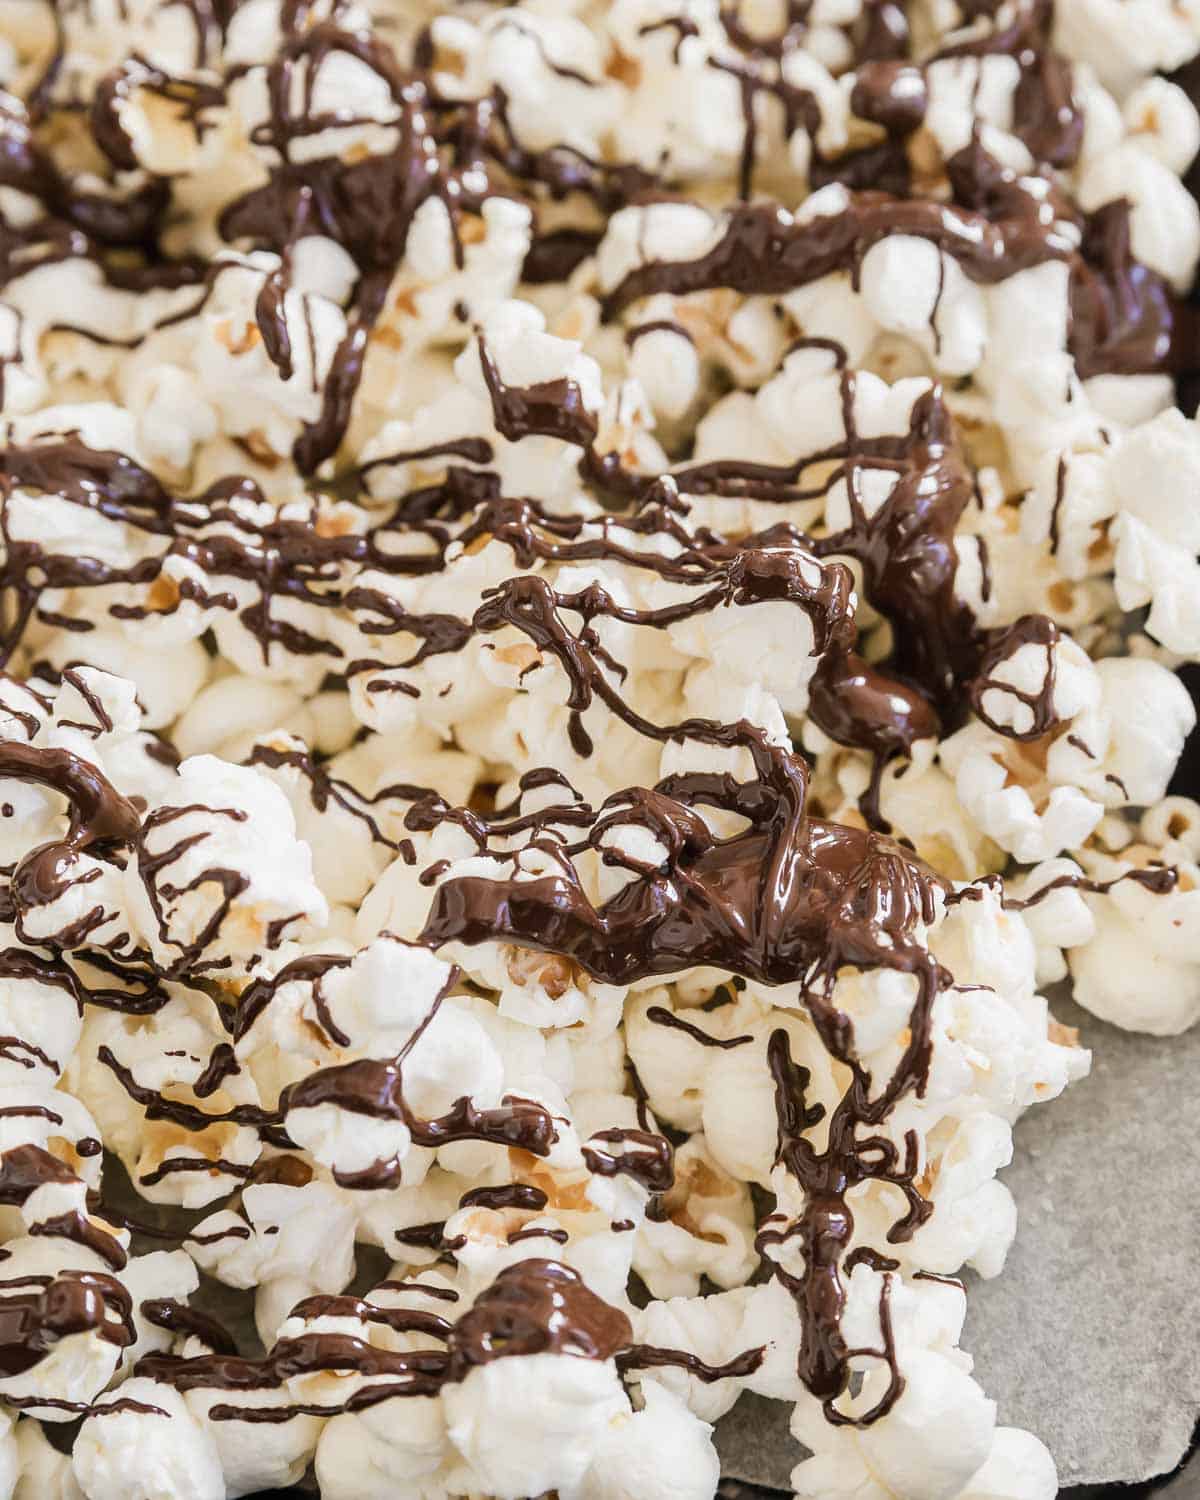 Chocolate drizzled popcorn on a baking sheet.